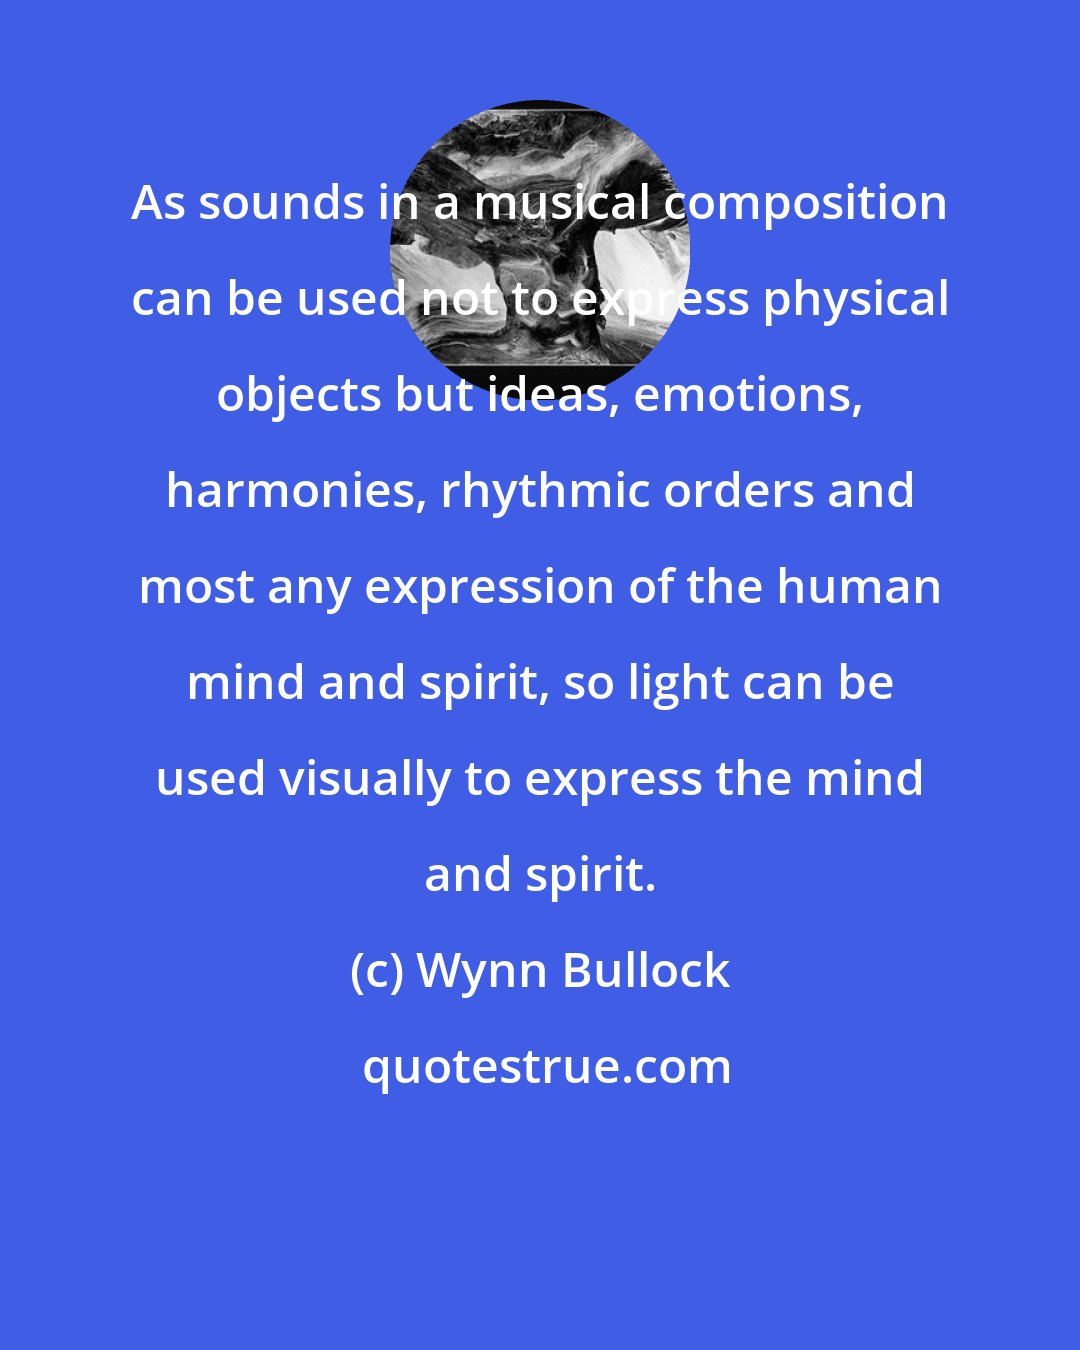 Wynn Bullock: As sounds in a musical composition can be used not to express physical objects but ideas, emotions, harmonies, rhythmic orders and most any expression of the human mind and spirit, so light can be used visually to express the mind and spirit.